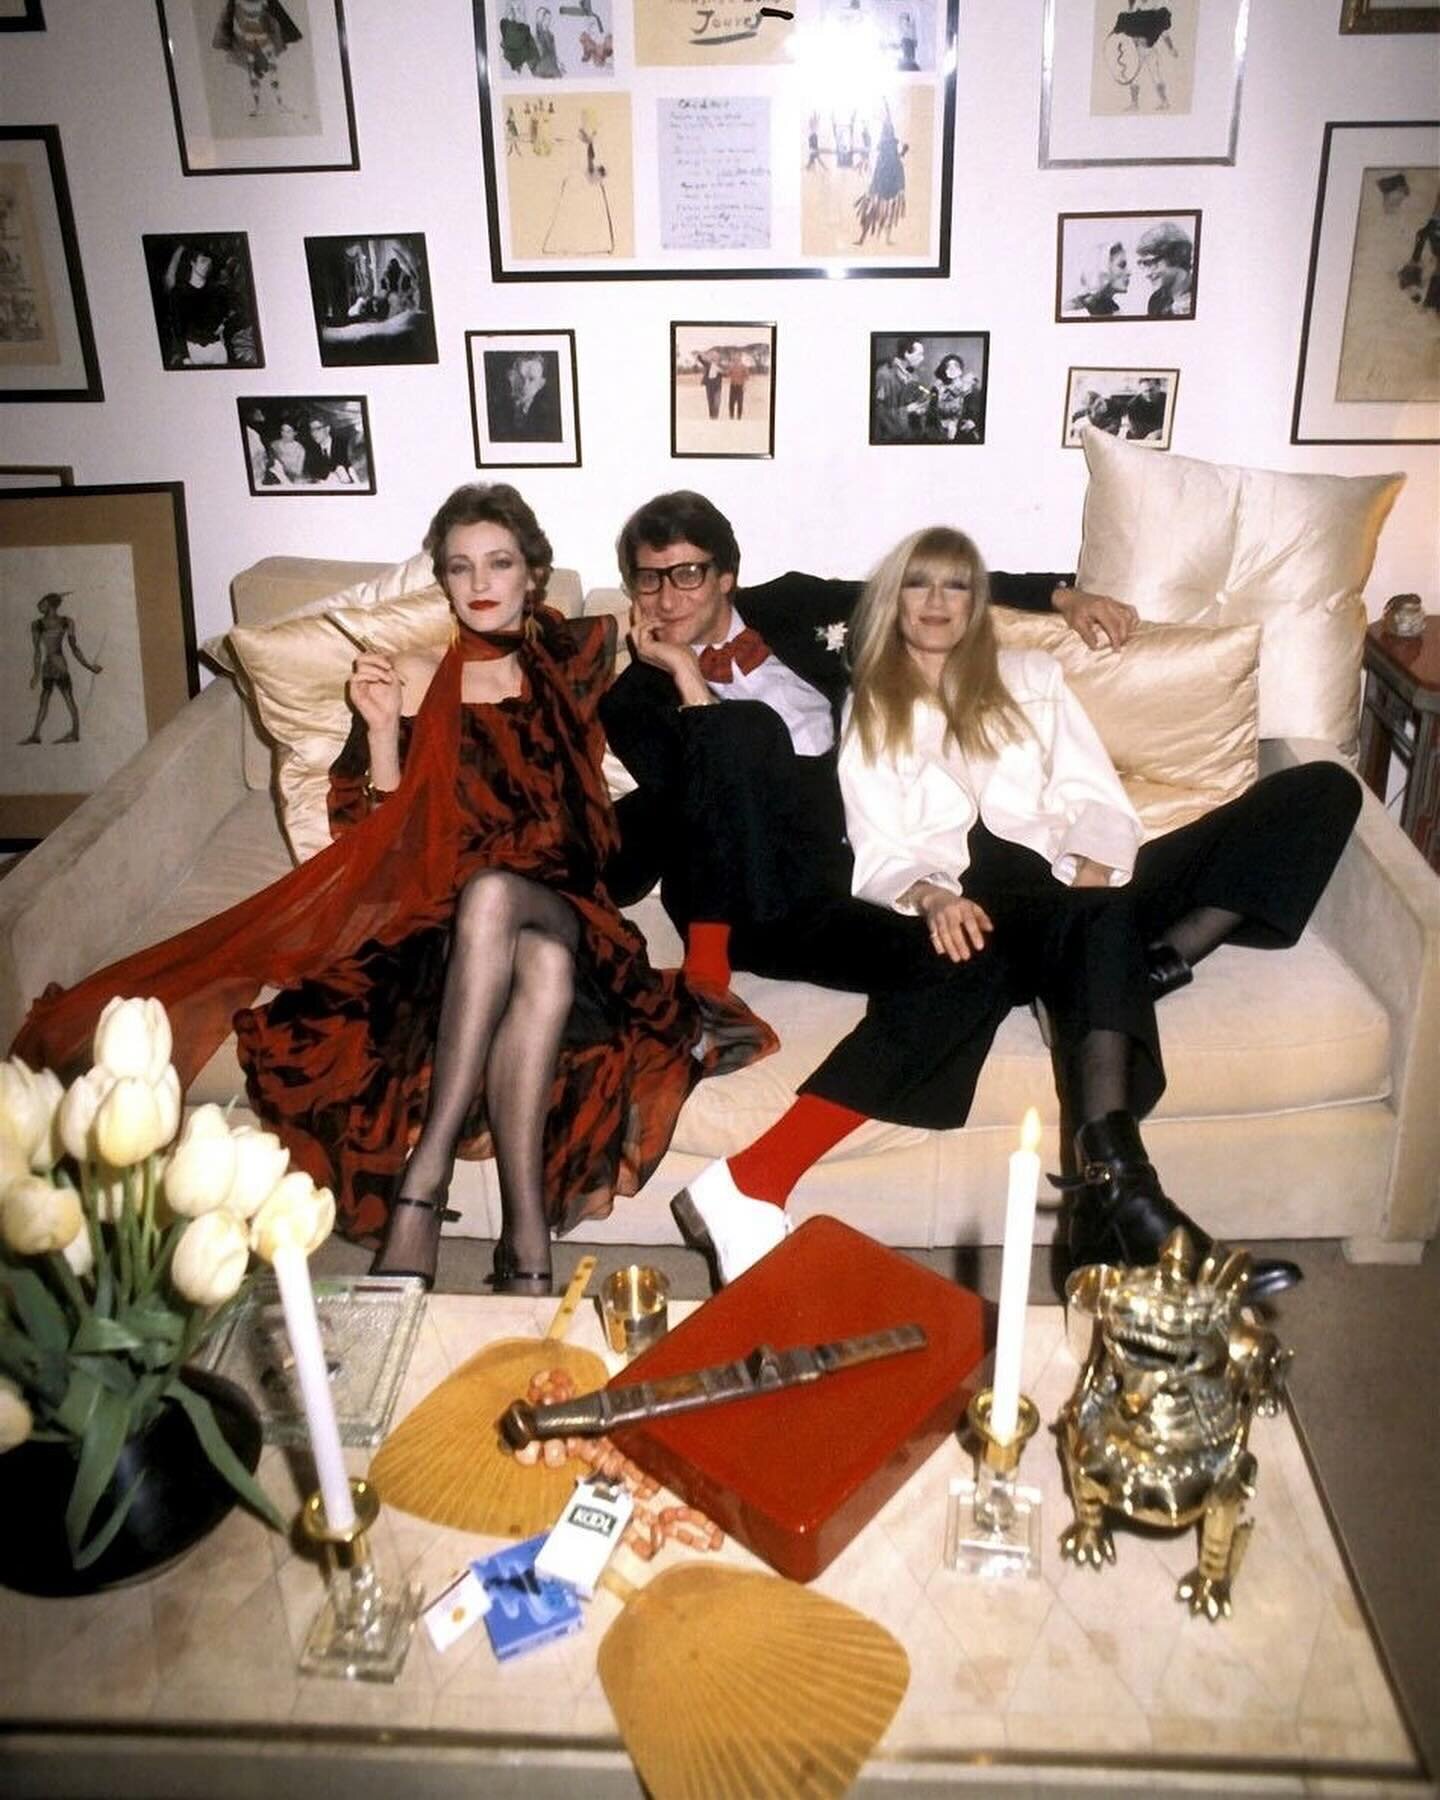 Yves Saint Laurent and his muses #iconic